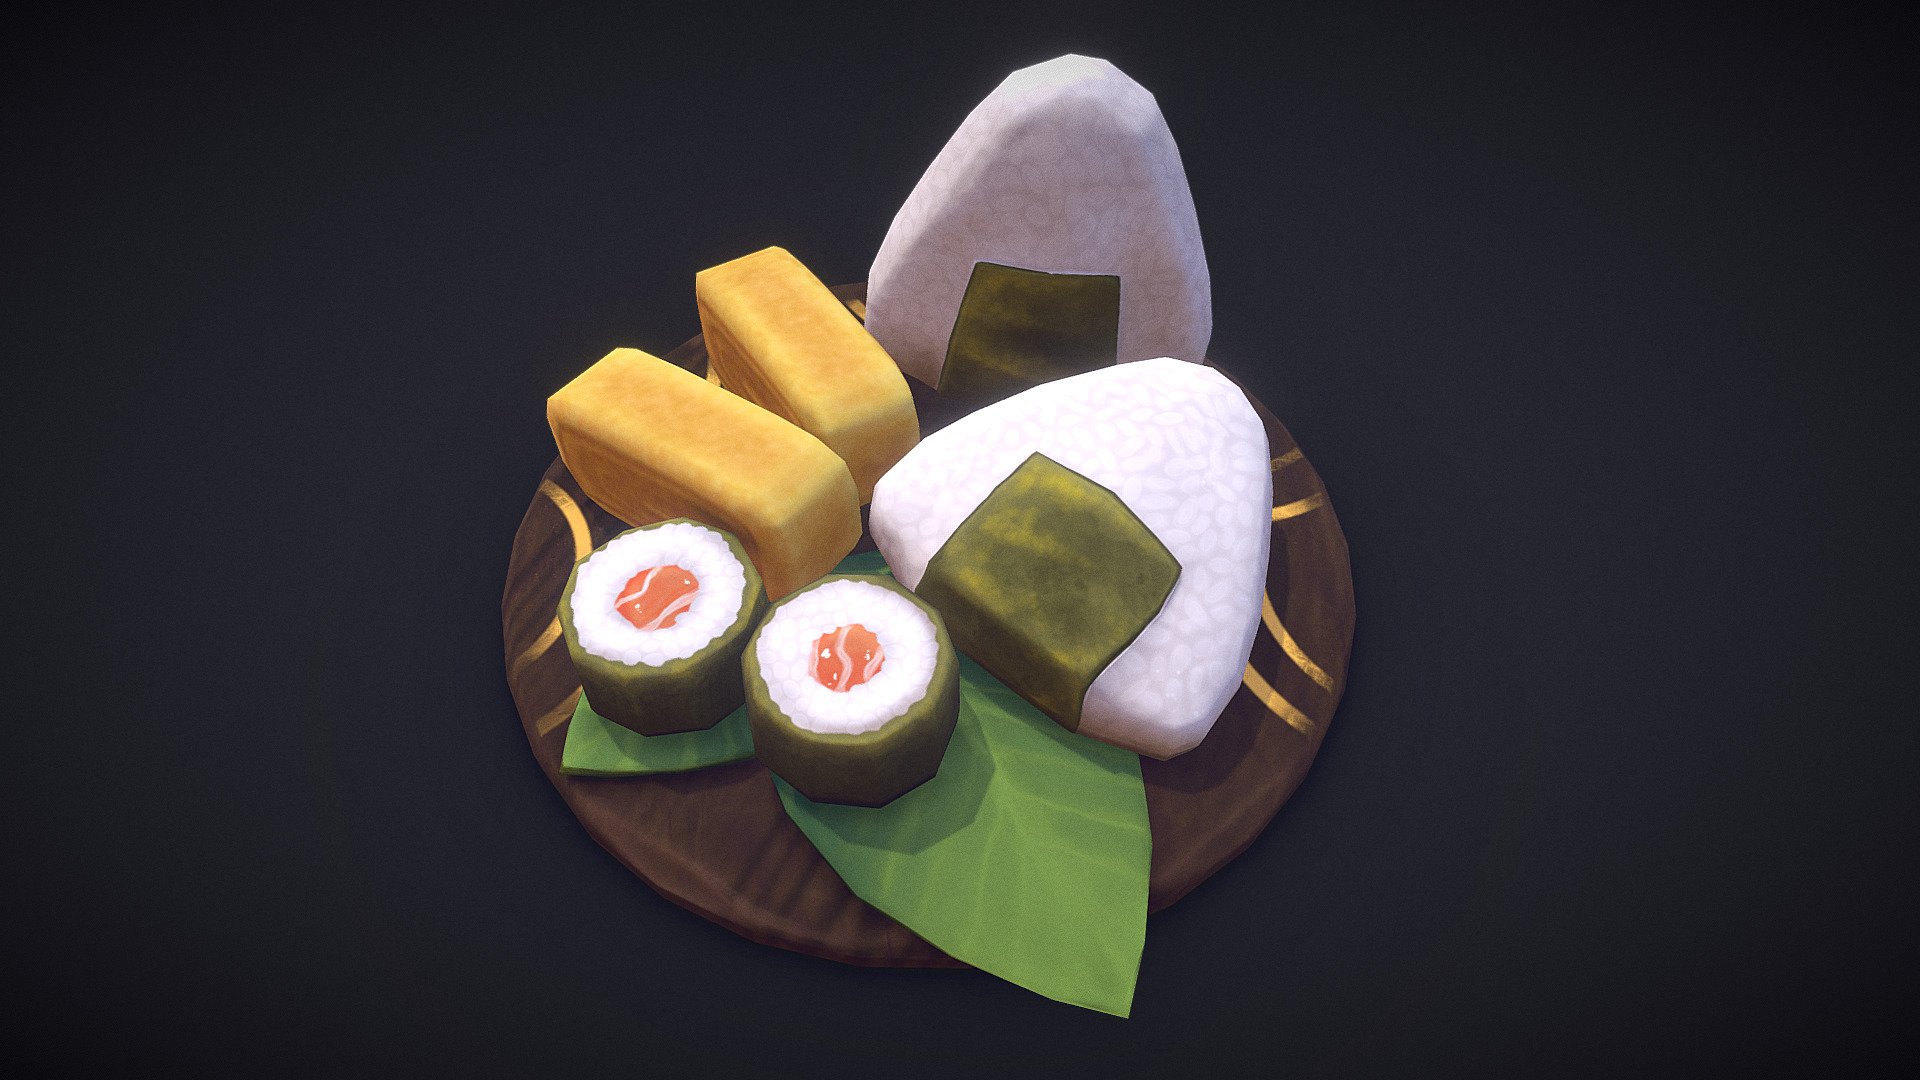 Low poly &amp; texturing practice - inspired by onigiri and eggroll foods from Genshin Impact! - Sushi Plate - 3D model by kayvenn 3d model